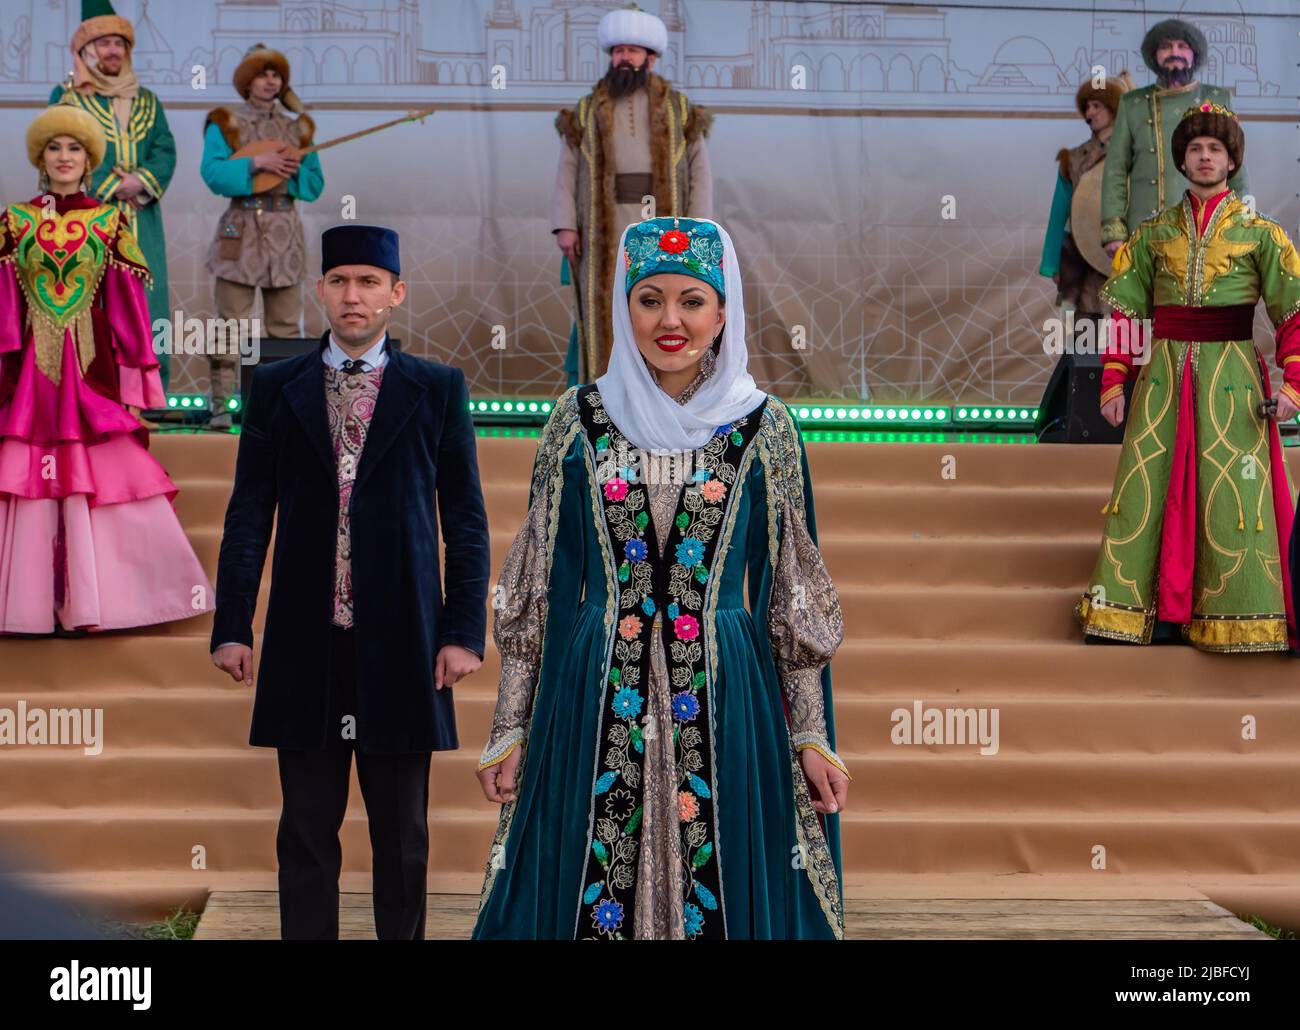 Bolgar, Tatarstan, Russia. May 21, 2022. Tatar National Ensemble dances and sings at the Folklore Festival. Tatars in national costumes. Ethnics and traditional arts concept. Stock Photo